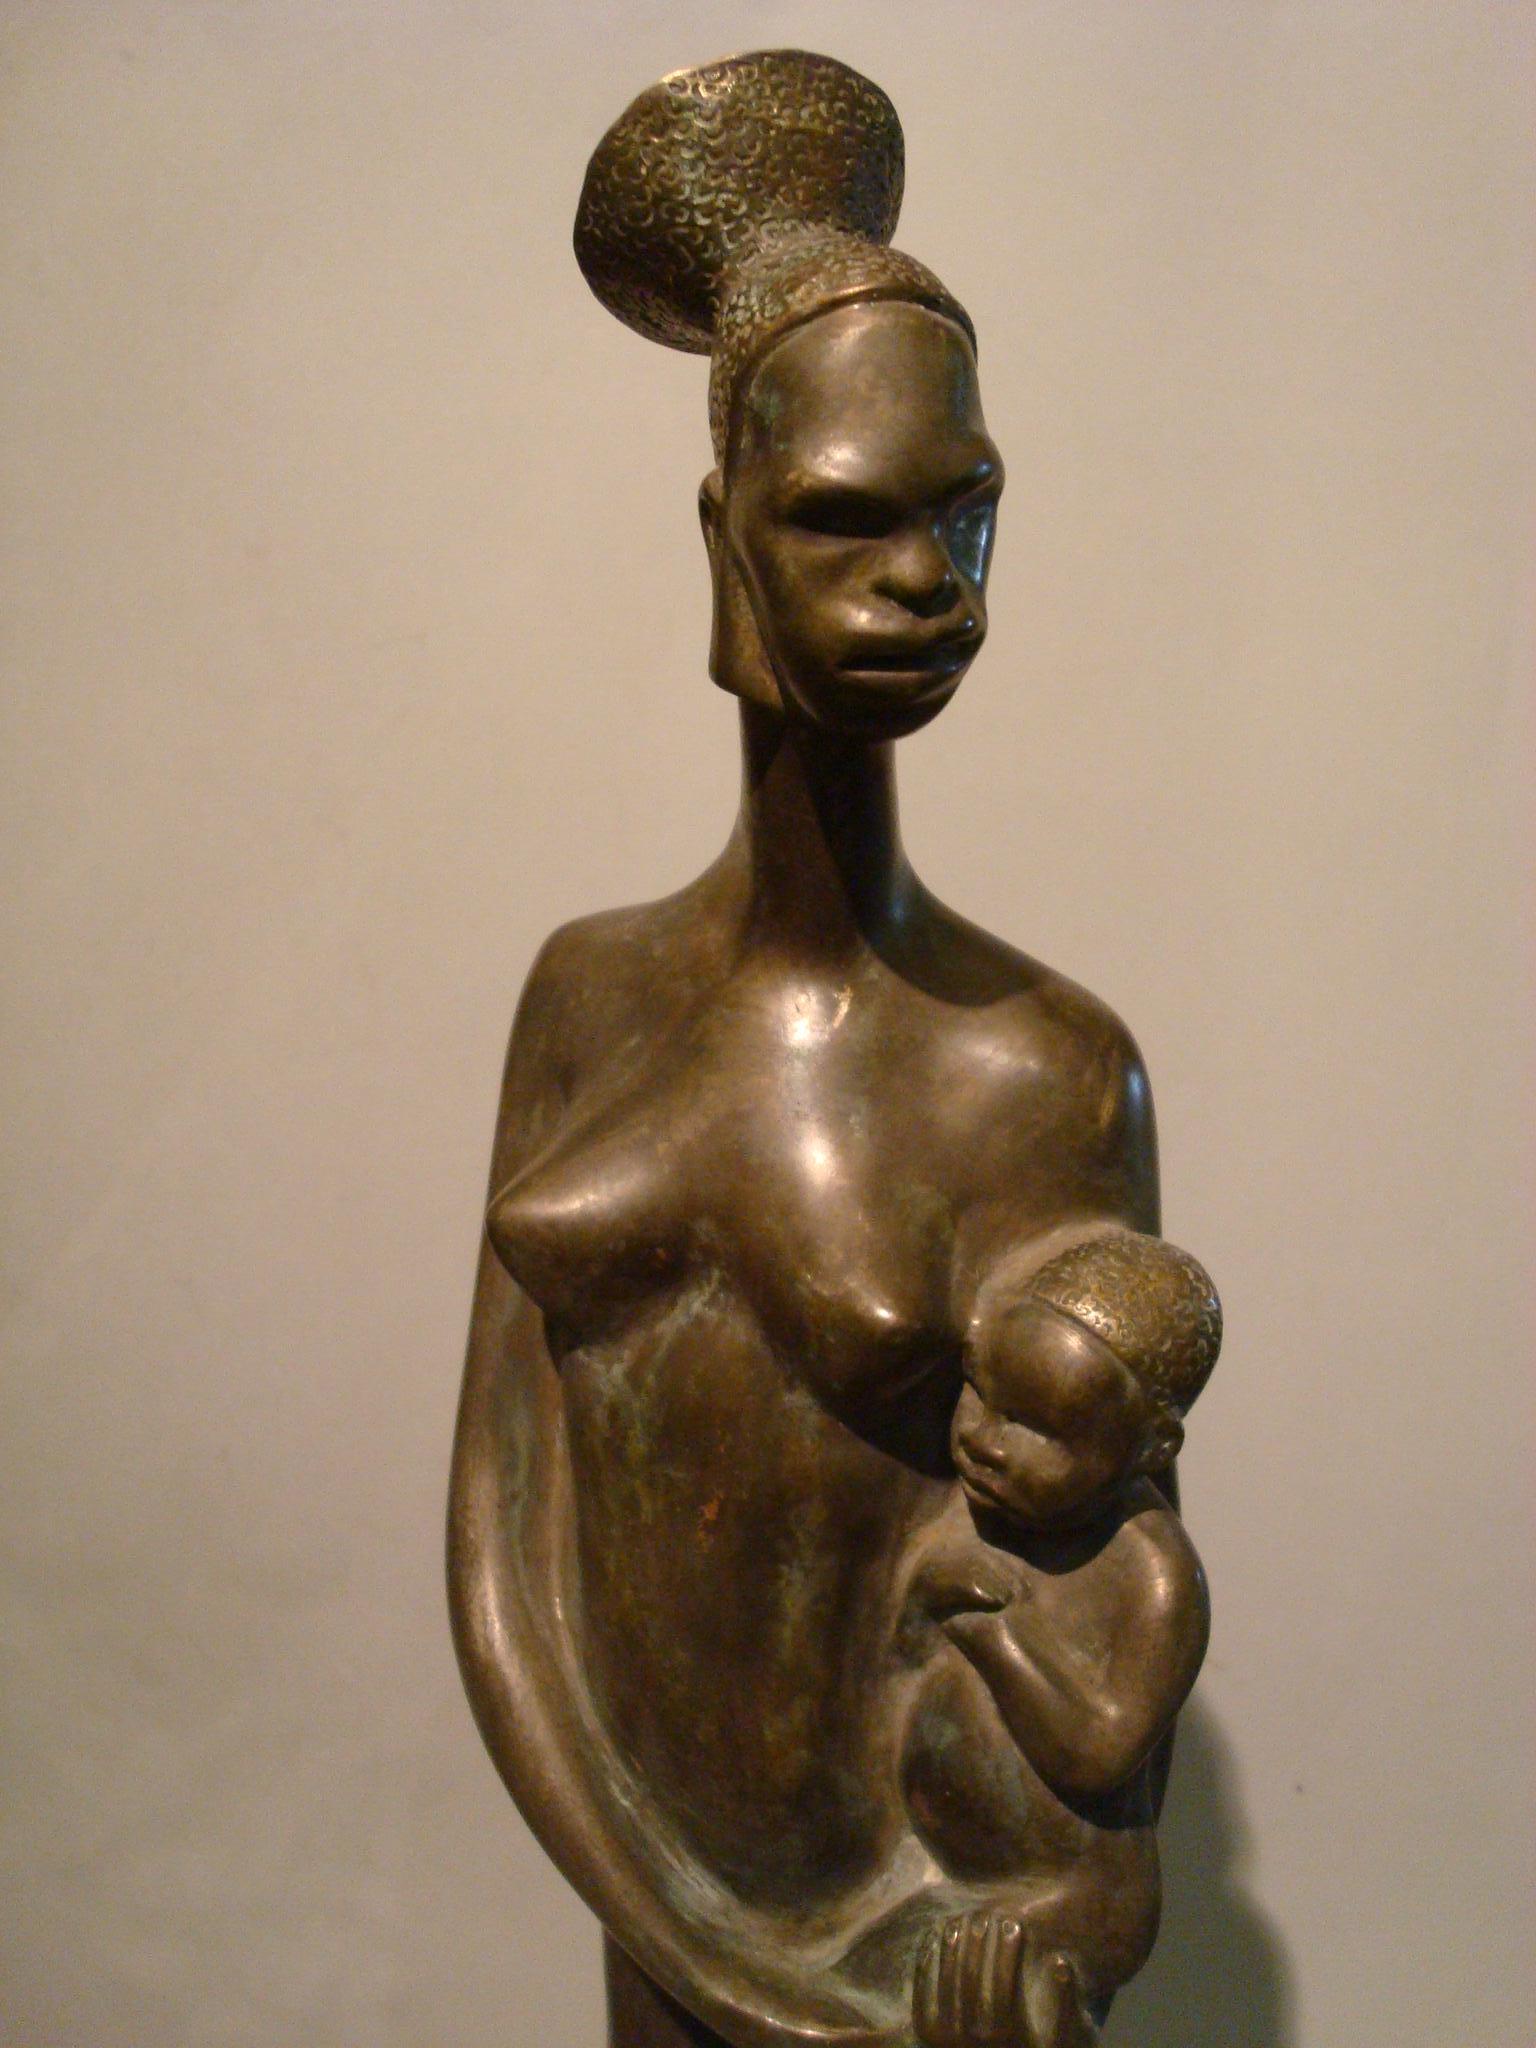 Large Art Deco naked African Women with a child in arms. France, 1920s
Art Deco bronze sculpture of an African Women.